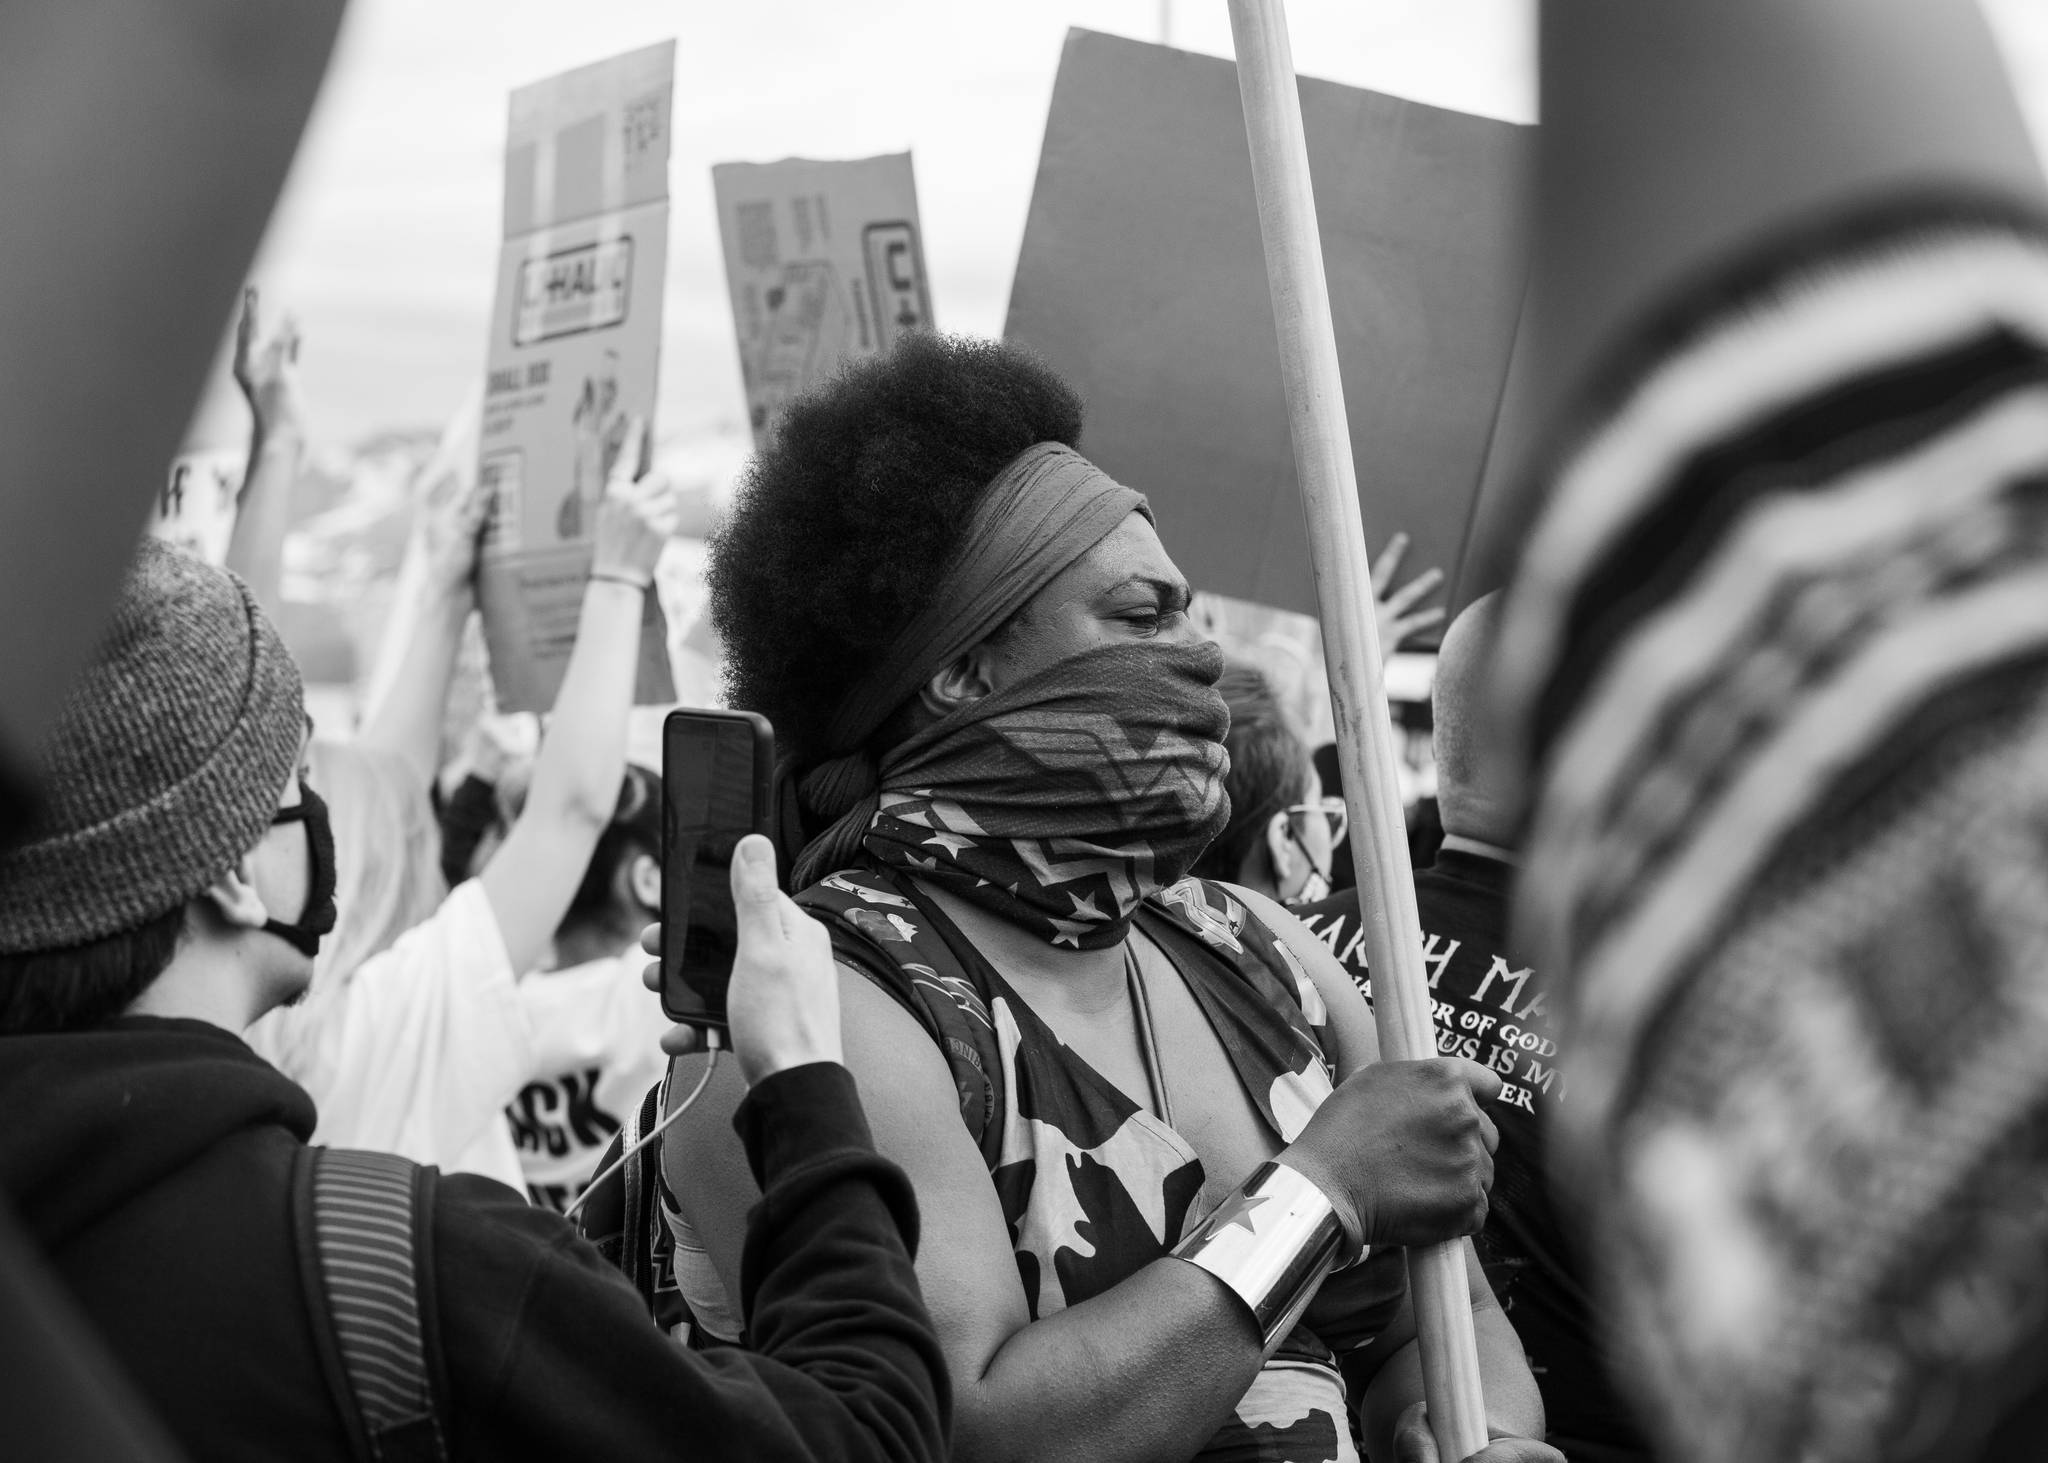 Photo by Jovell Rennie
A woman marches during a Black Lives Matter protest in Anchorage, Alaska in the summer of 2020.